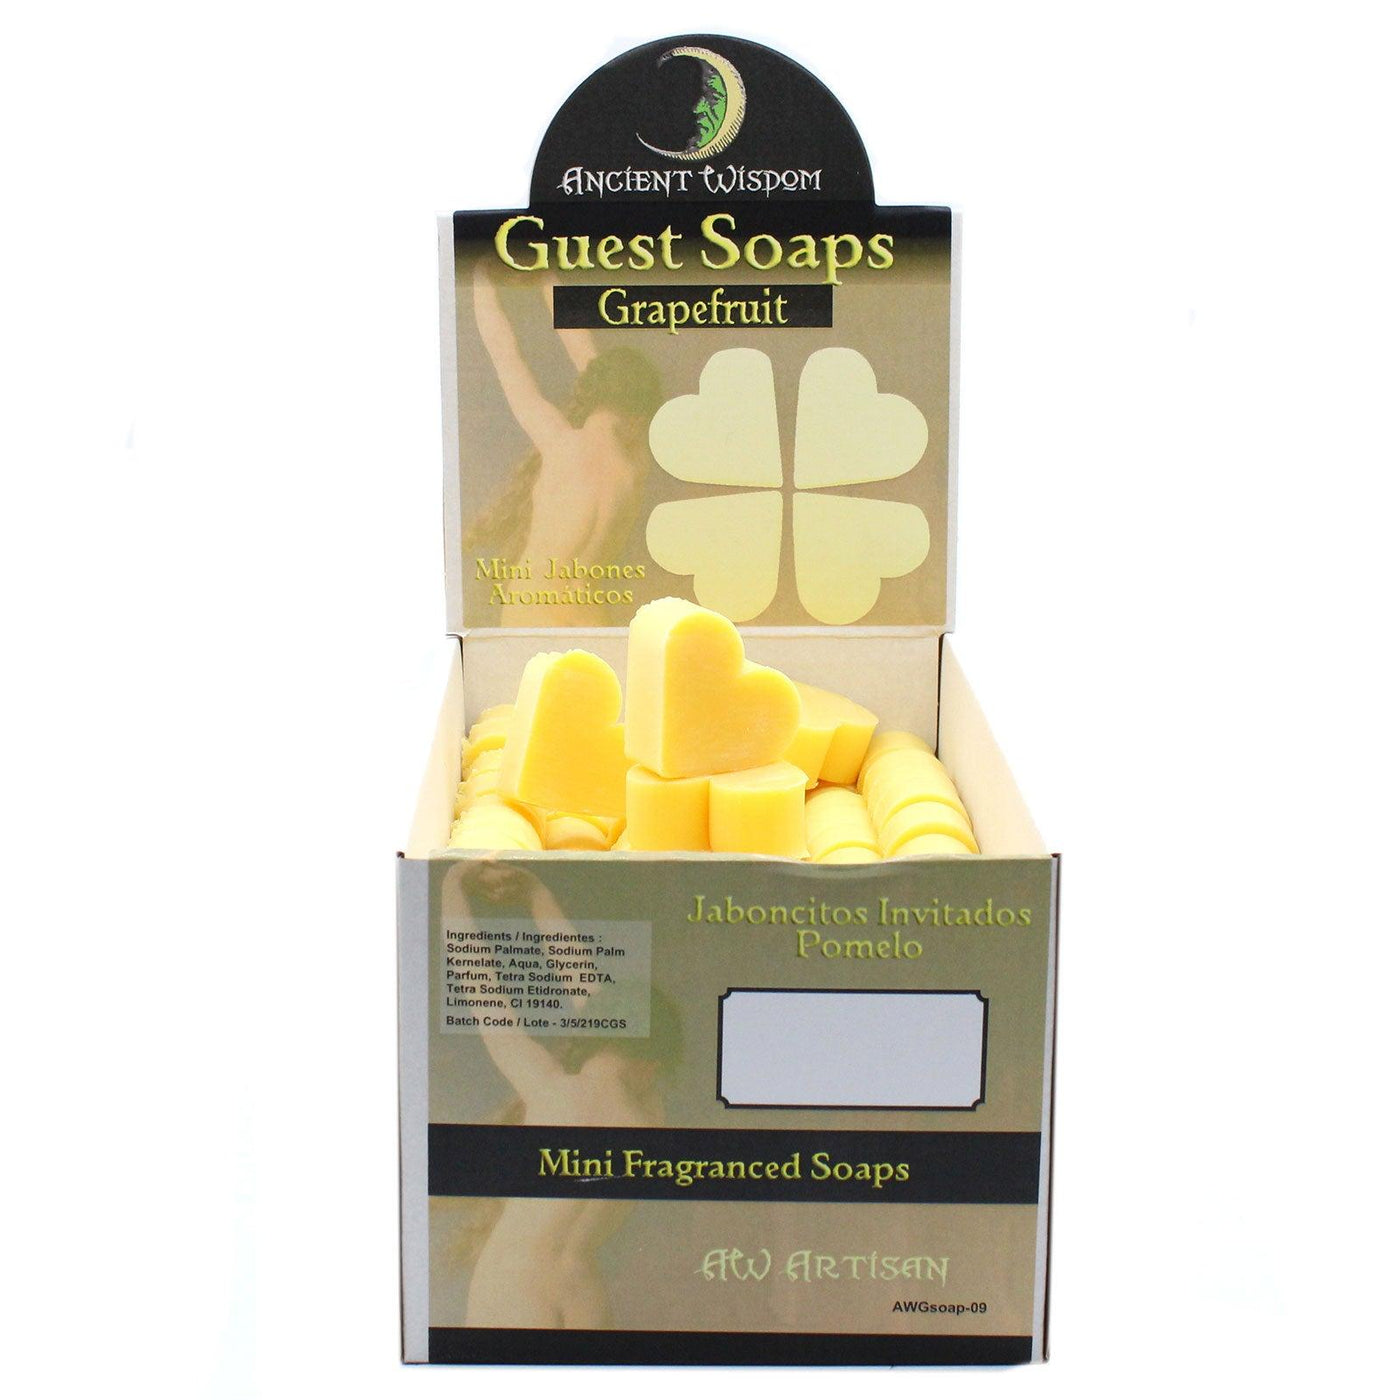 10x Heart Shaped Paraben Free Guest Soap - Orange And Warm Ginger.